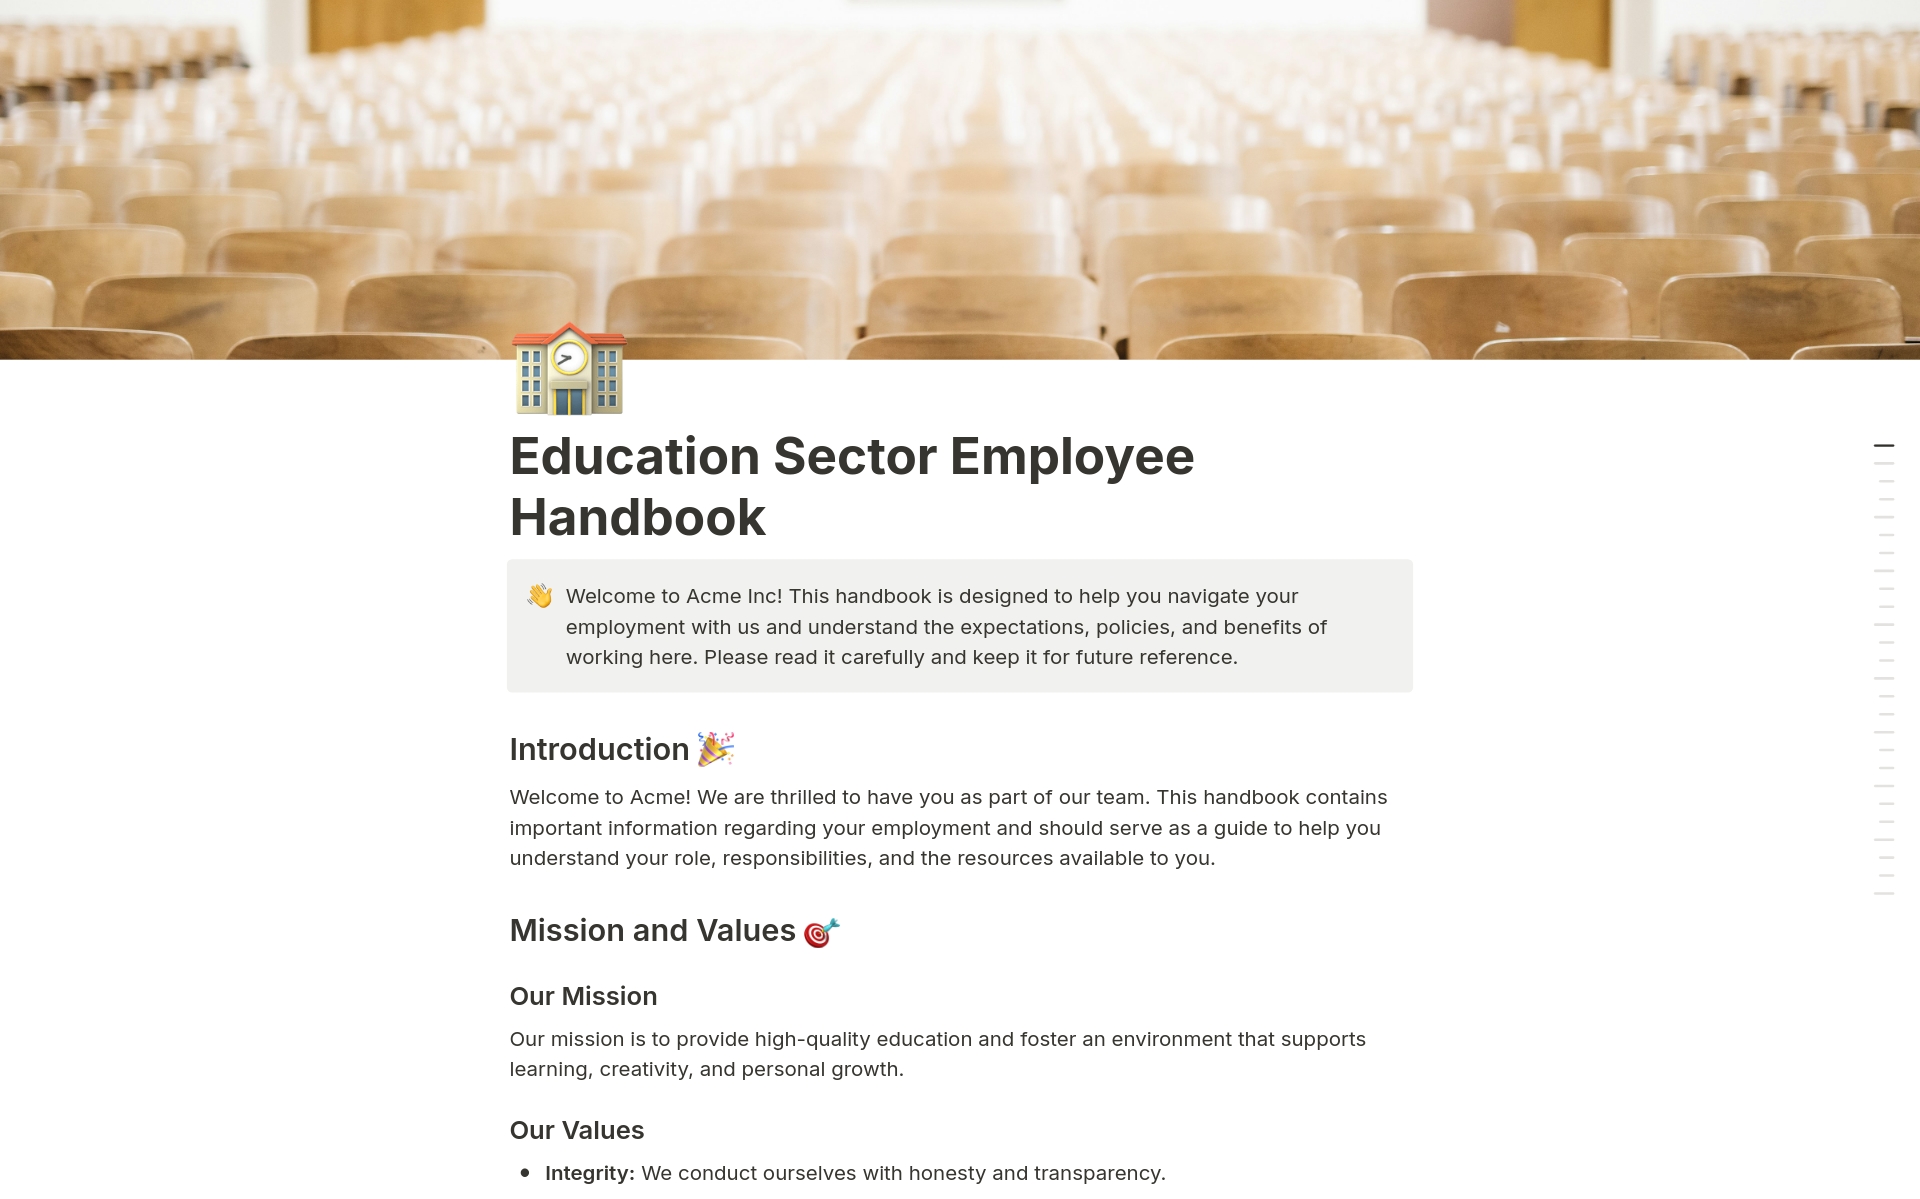 Essential guide for education sector employees, covering teaching policies, student guidelines, and institutional standards.